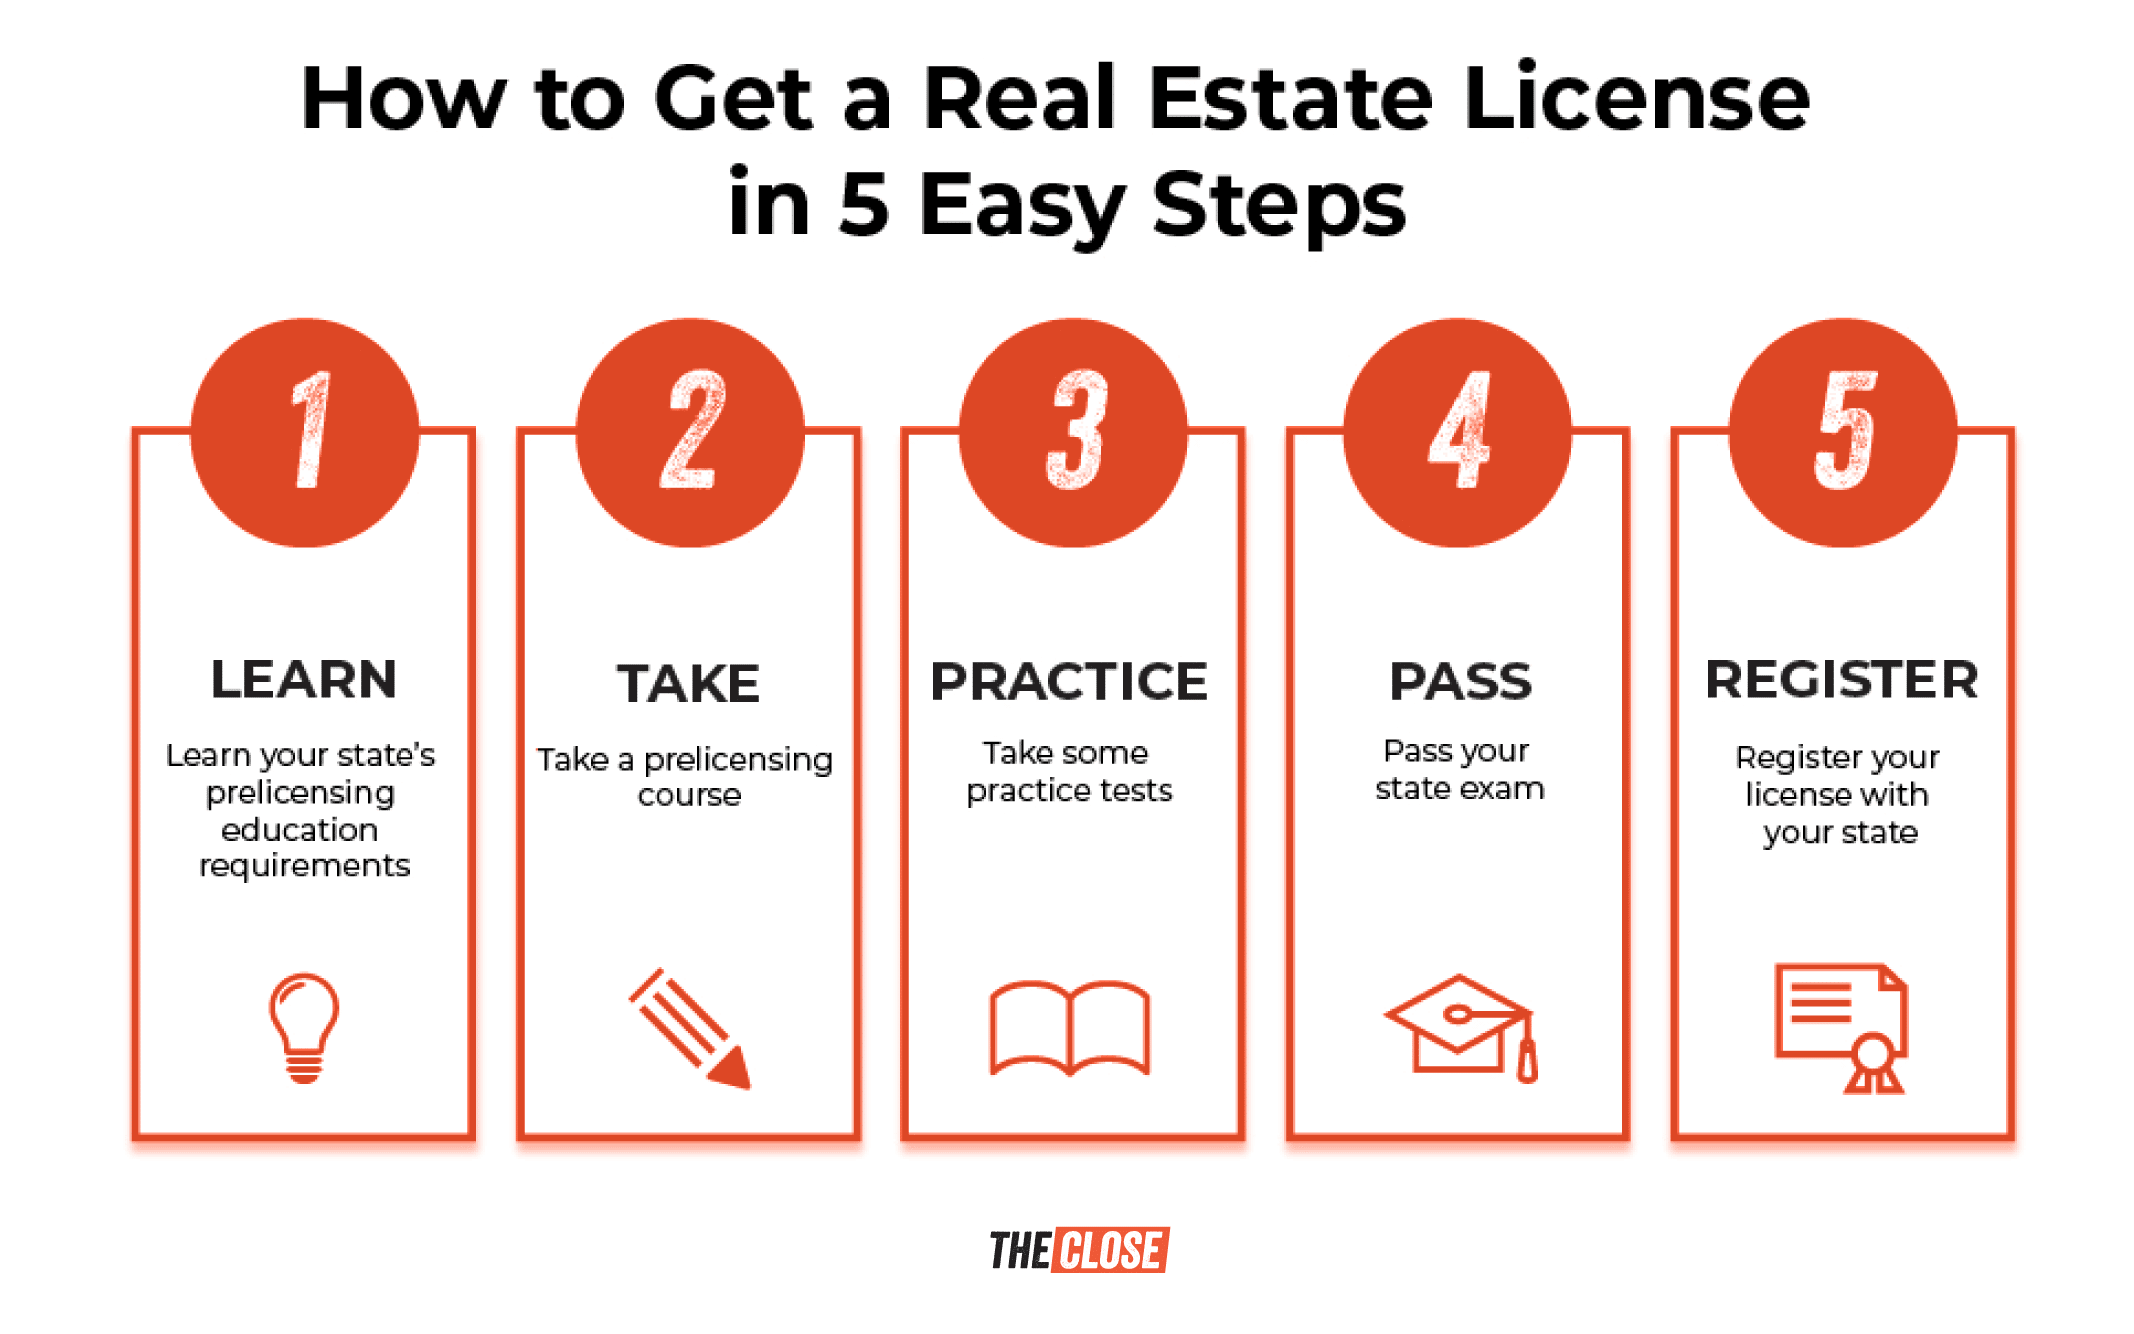 How to Get a Real Estate License in 5 Simple Steps